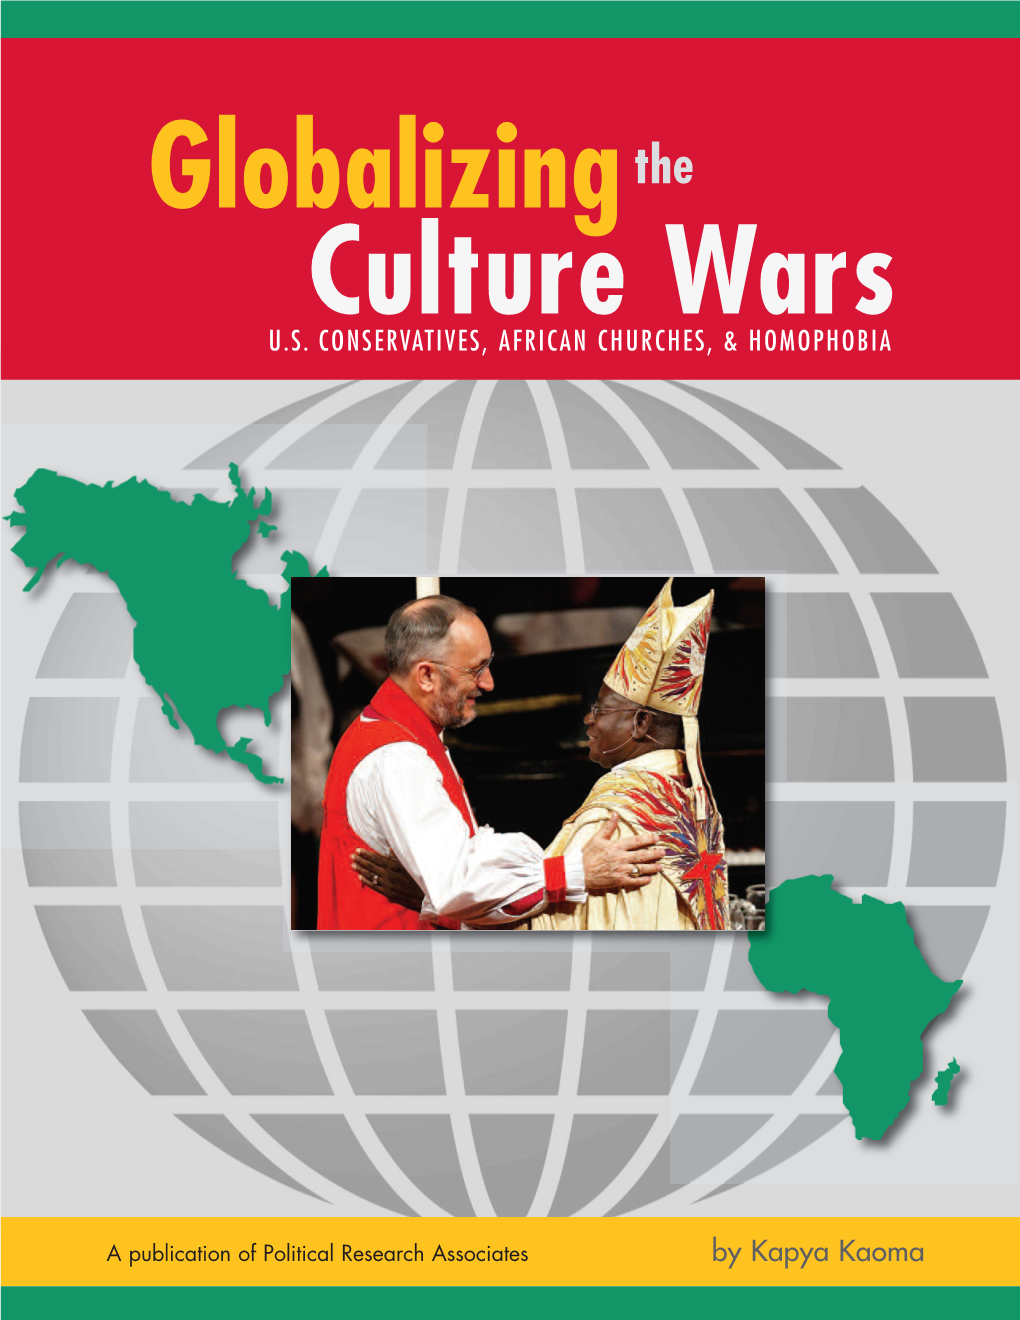 Globalizing the Culture Wars, Full Report